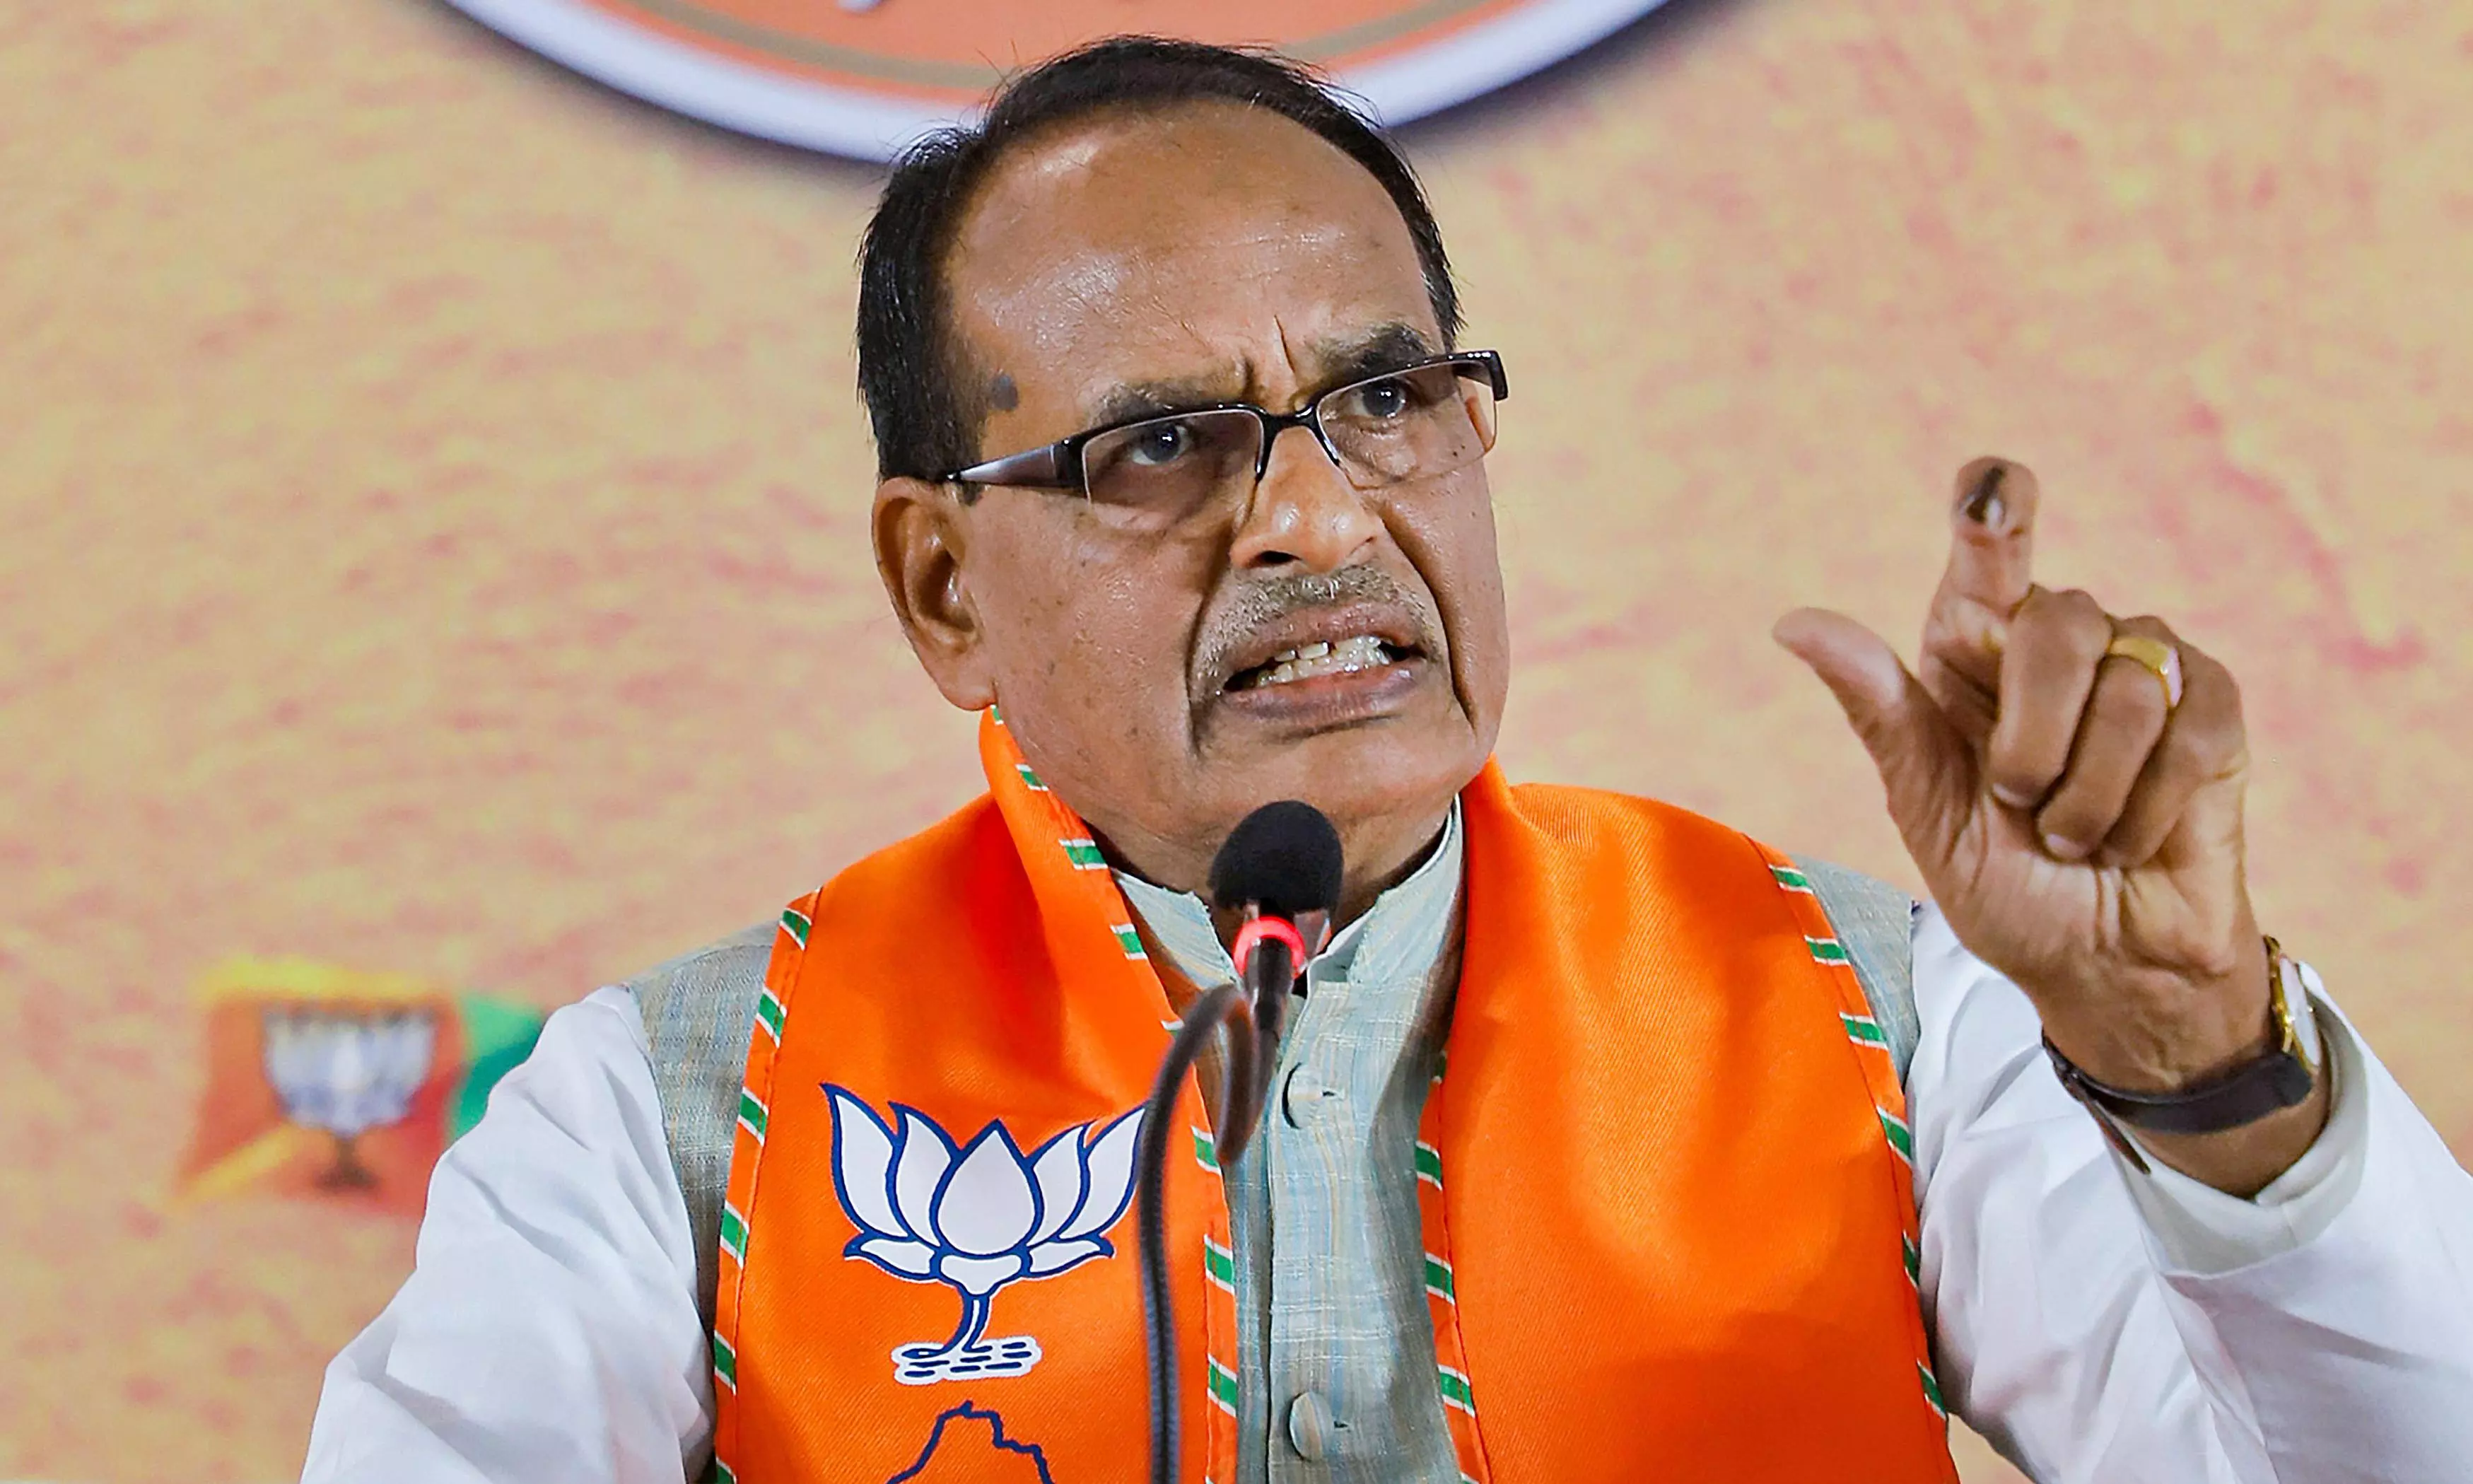 Every politician and elected leader is a social worker: Shivraj Singh Chouhan